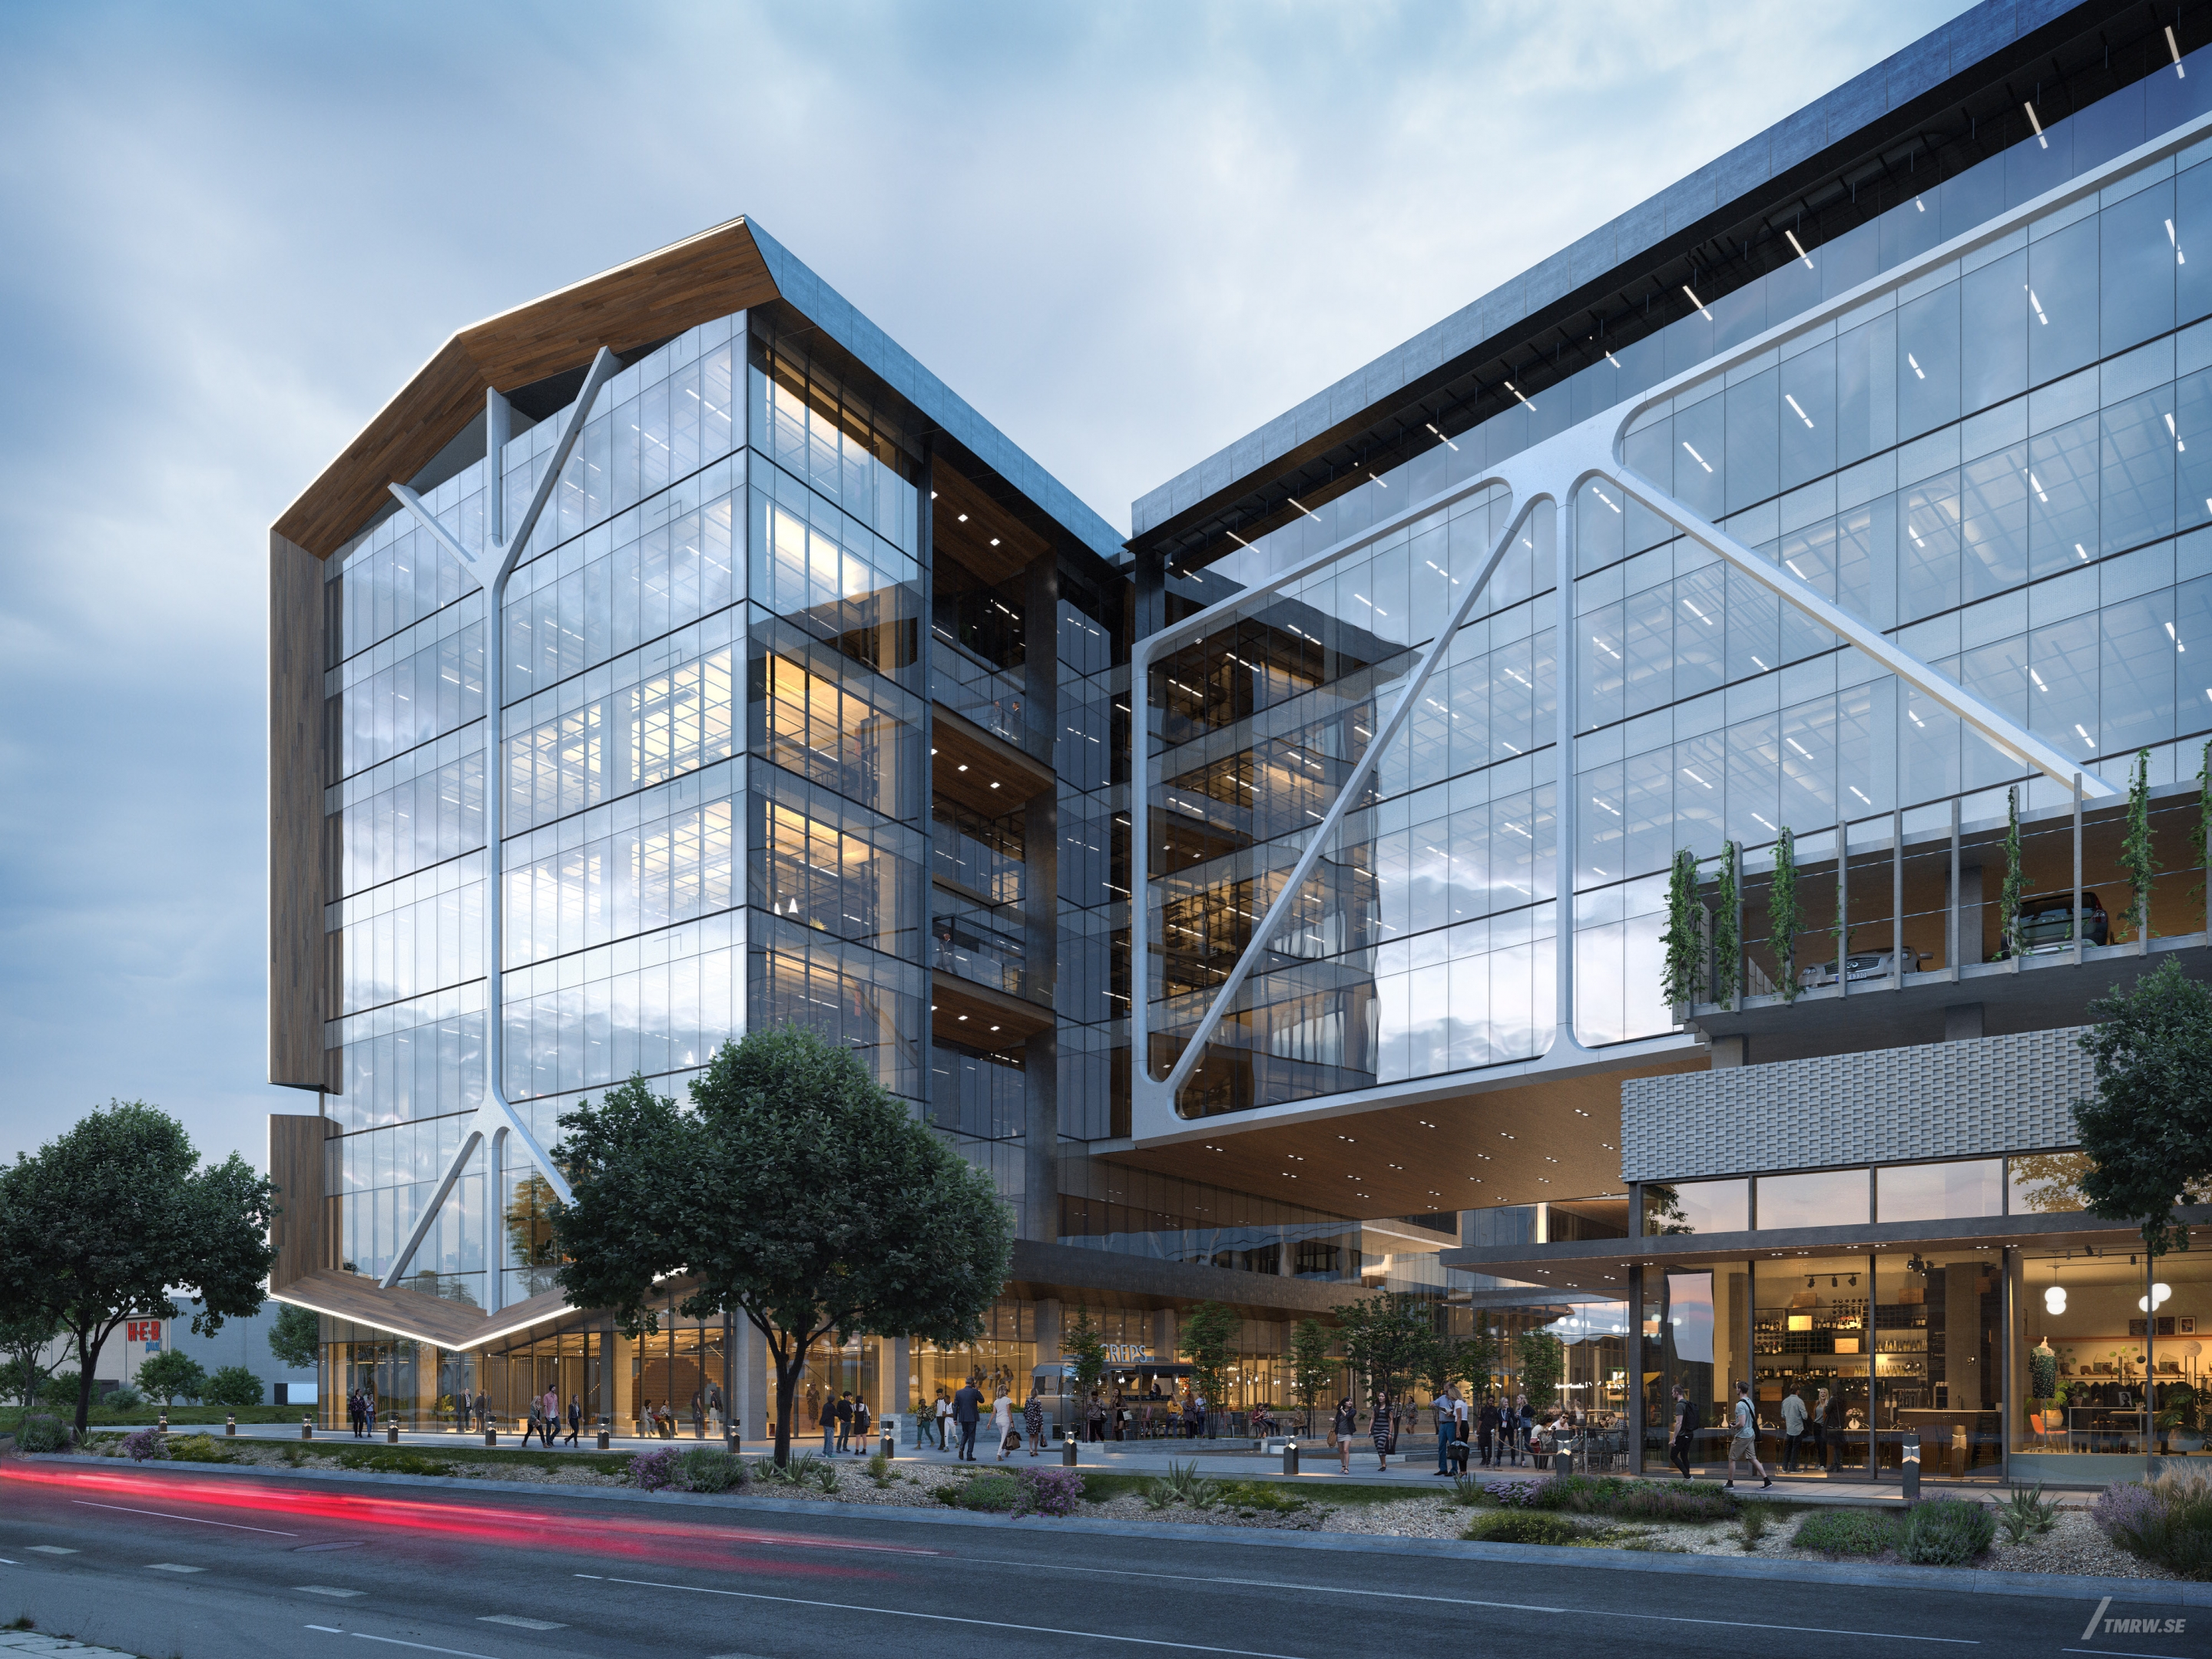 Architectural visualization of 1600 Pleasant for Gensler. A large building with a reflective glass faced in the evening light.